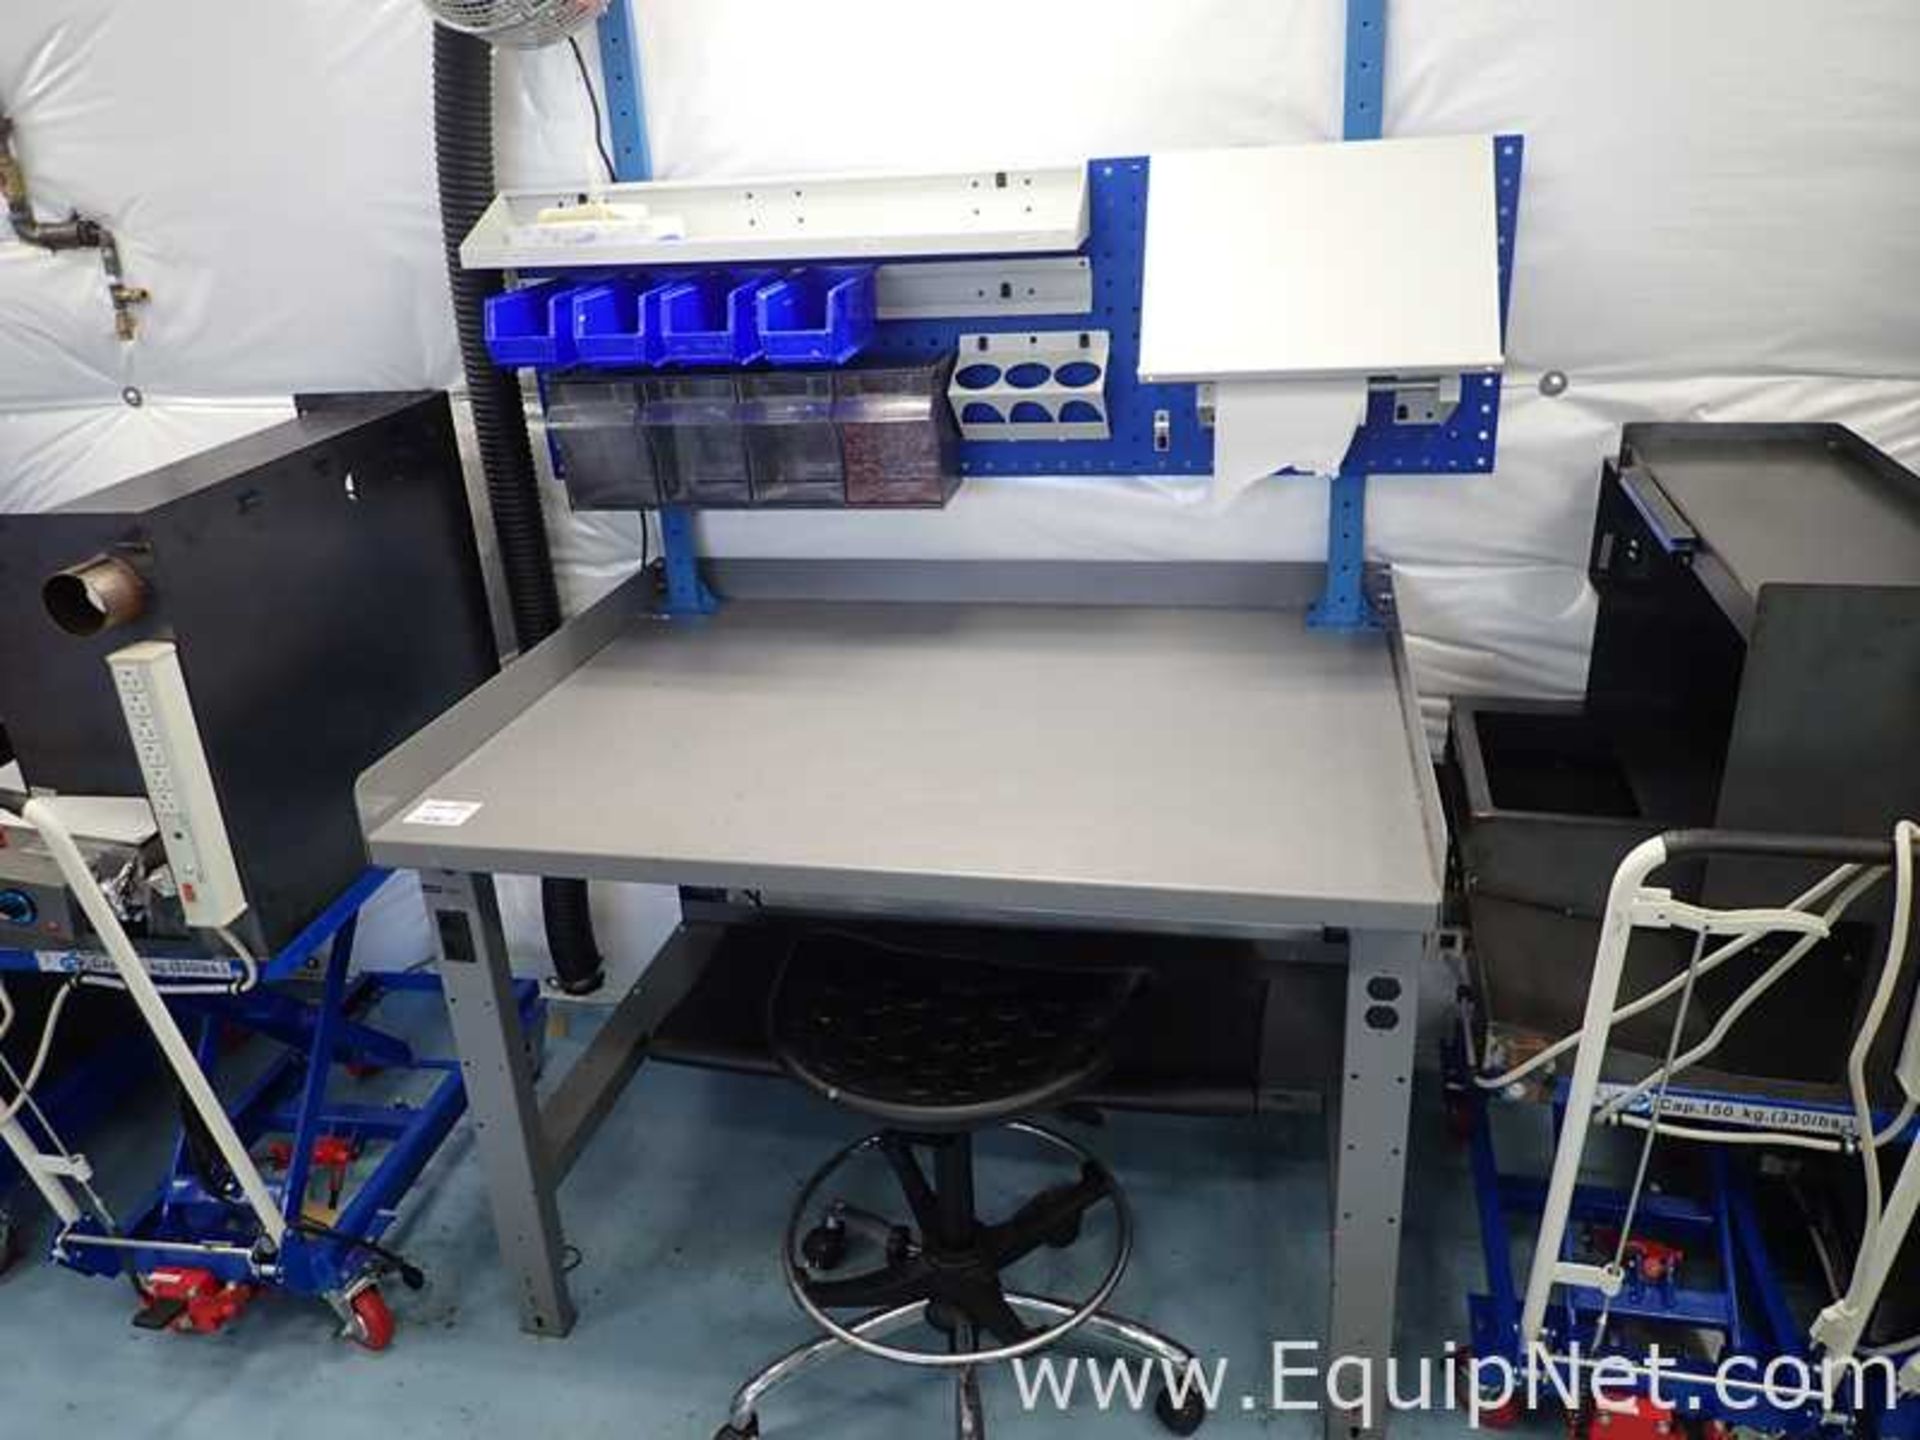 Lot of 3 Global Industrial Workstations - Image 3 of 4